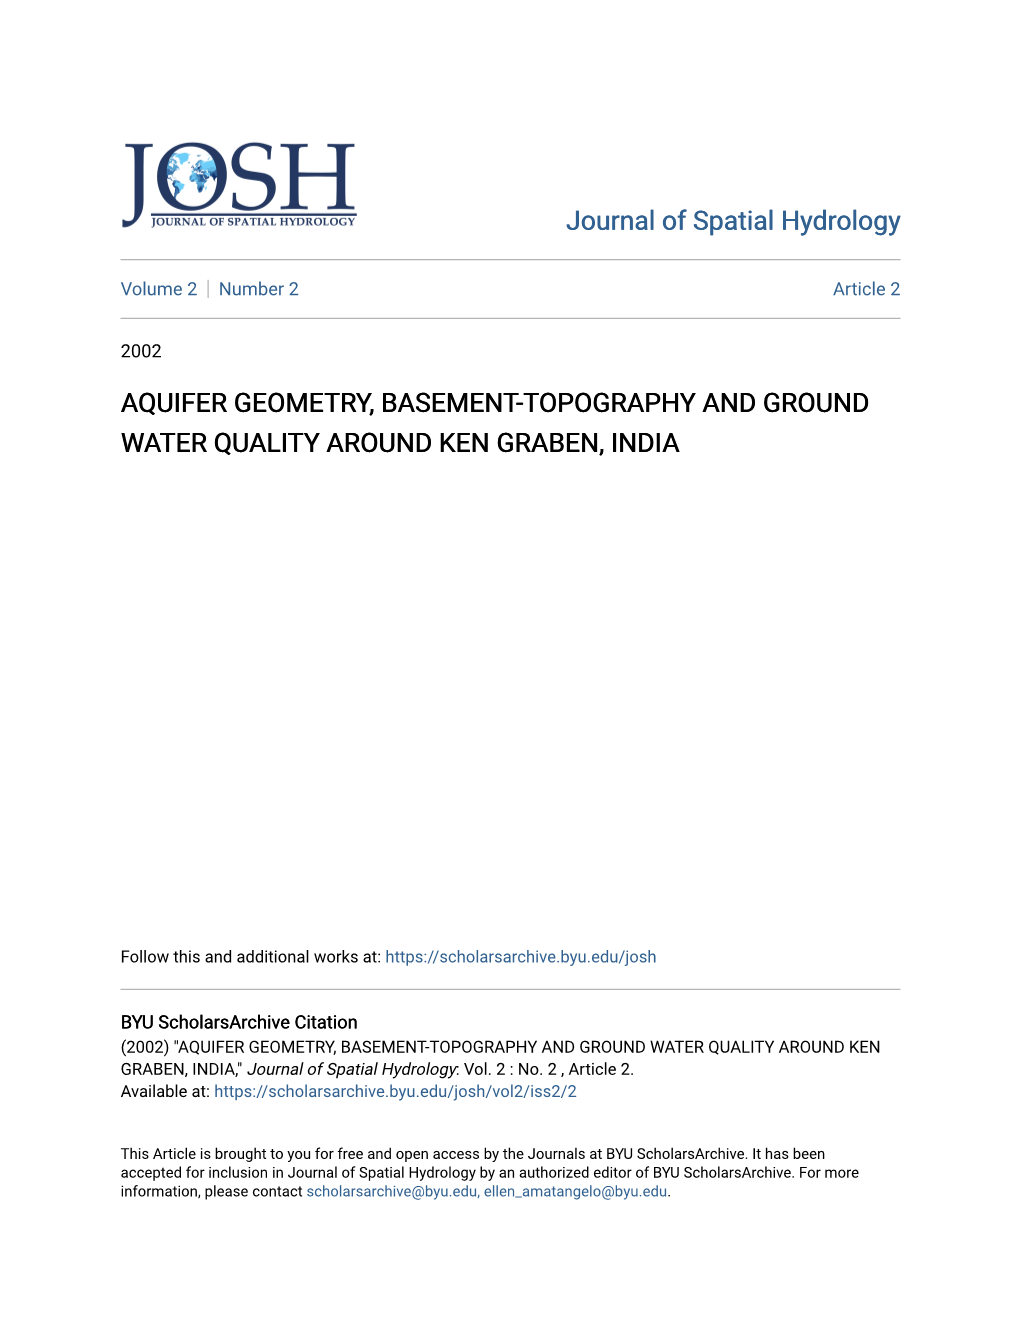 Aquifer Geometry, Basement-Topography and Ground Water Quality Around Ken Graben, India